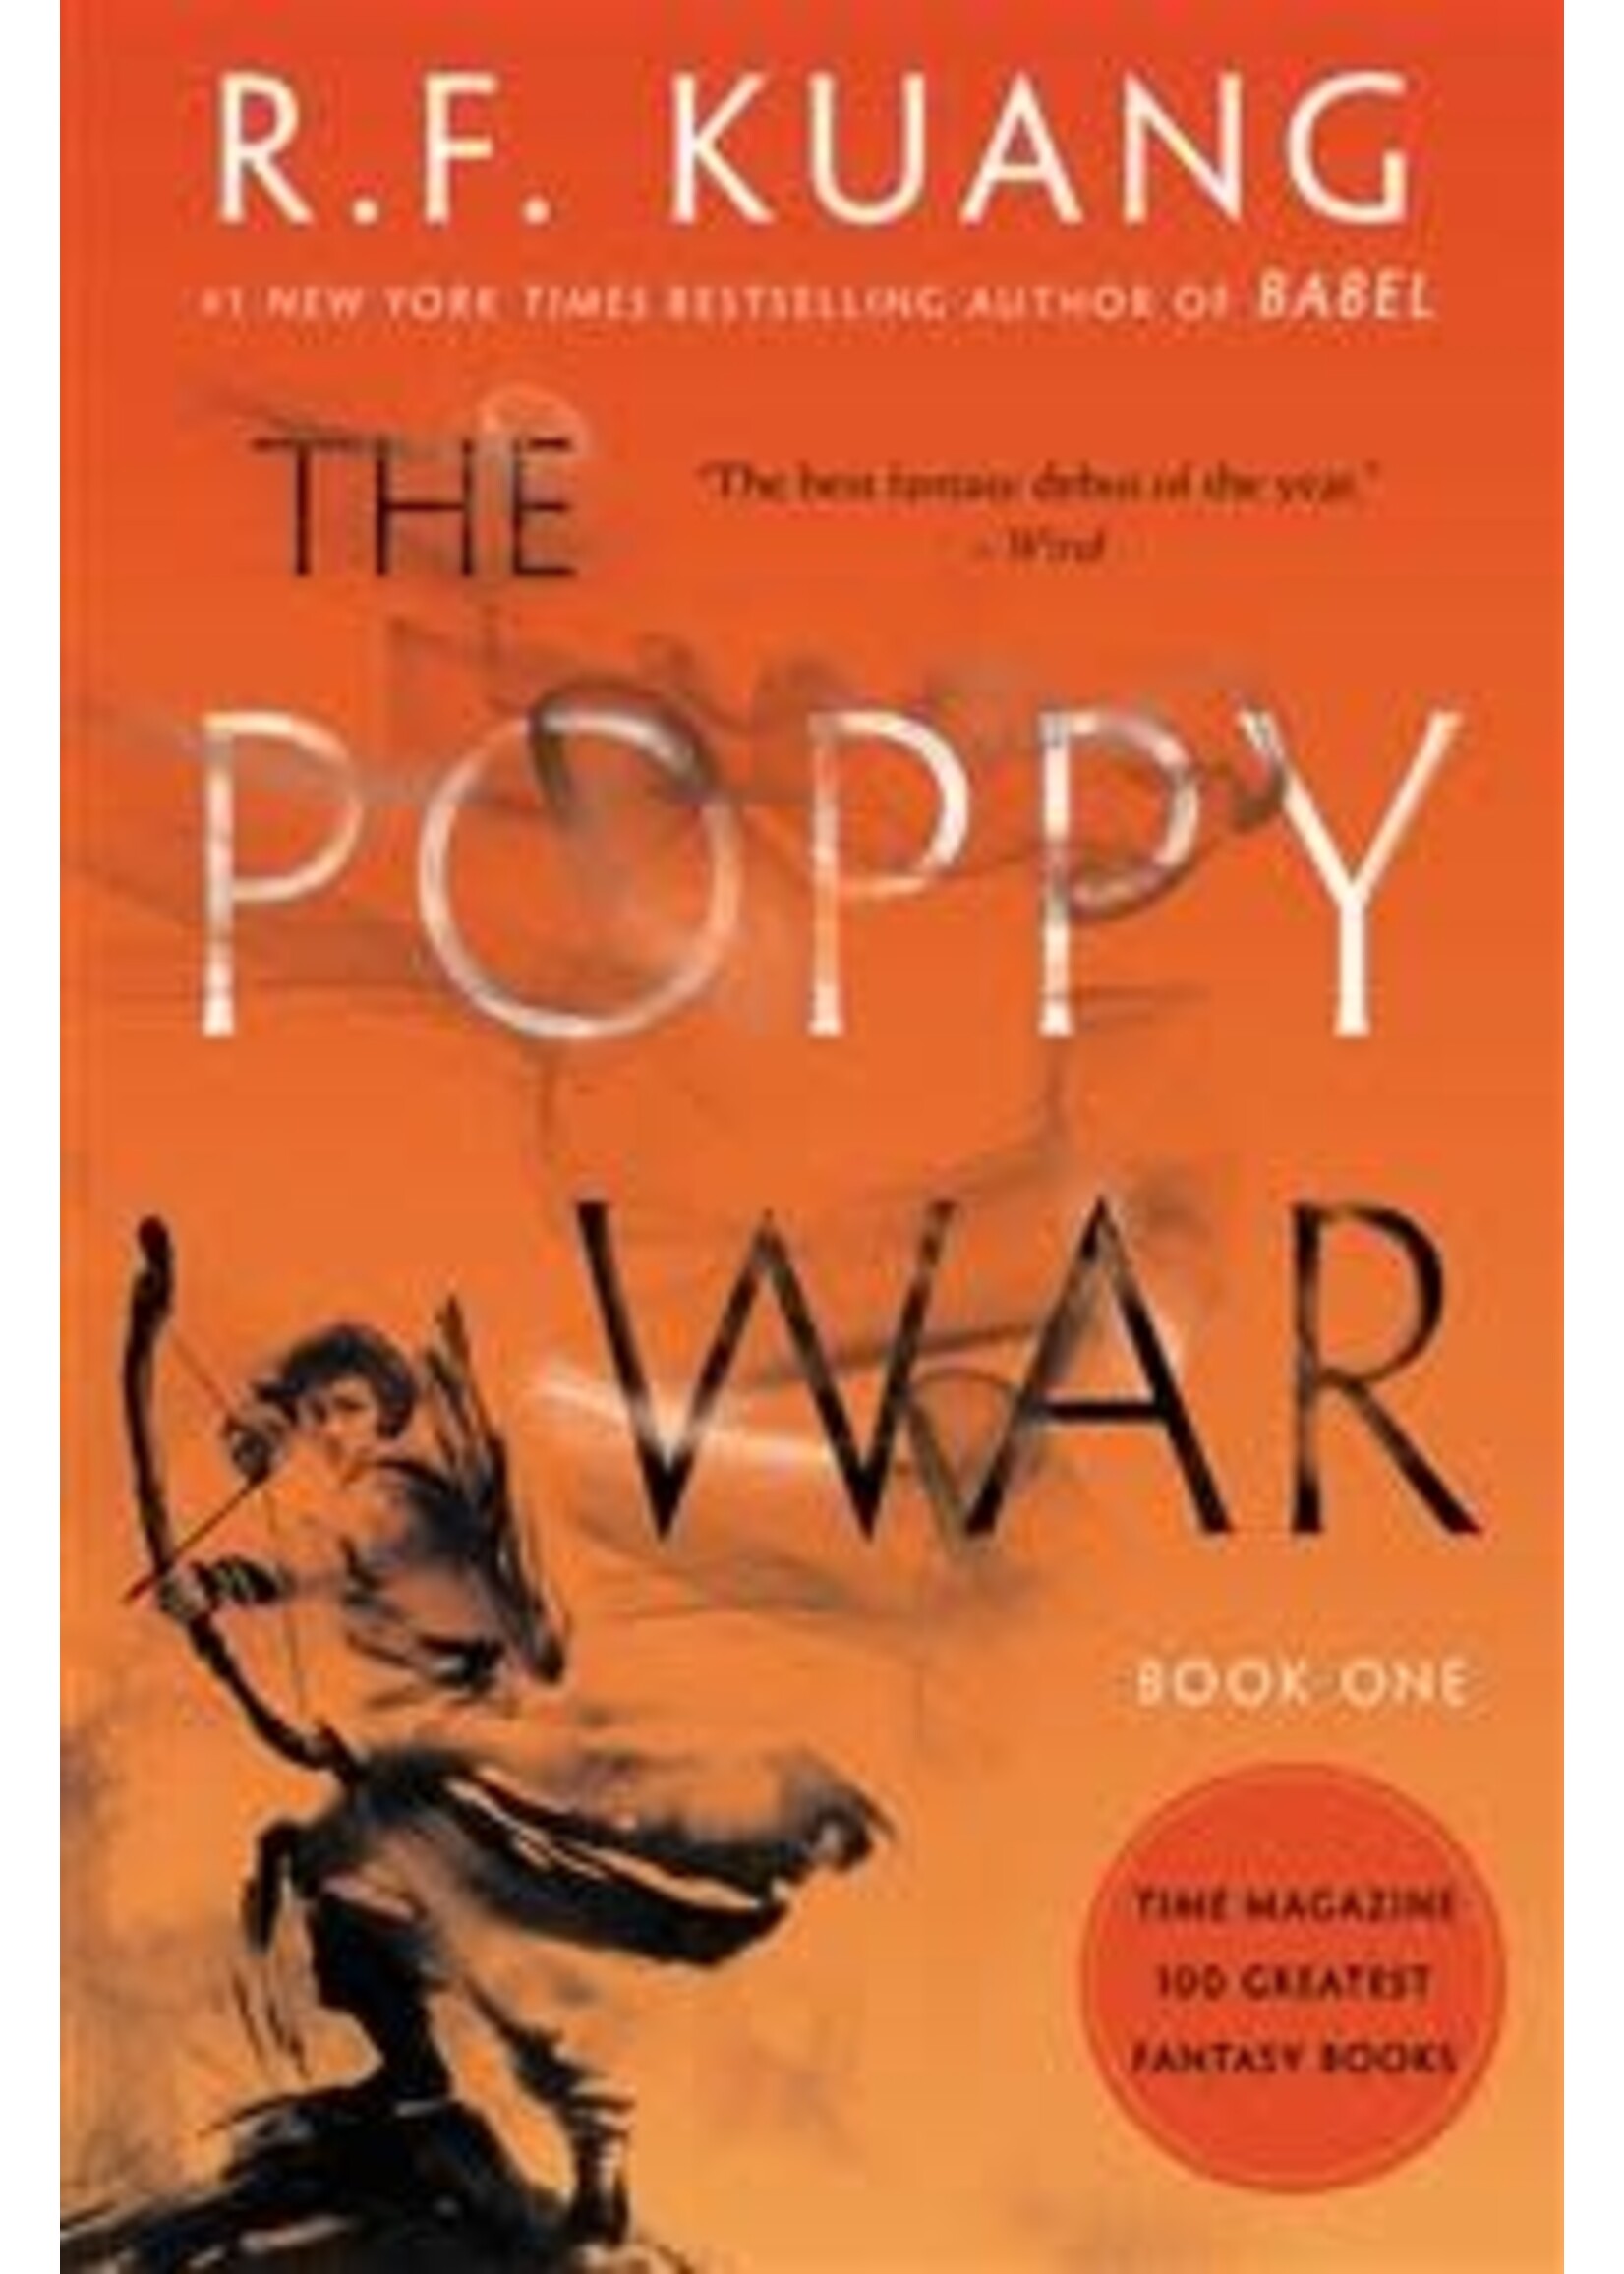 The Poppy War (The Poppy War #1) by R. F Kuang